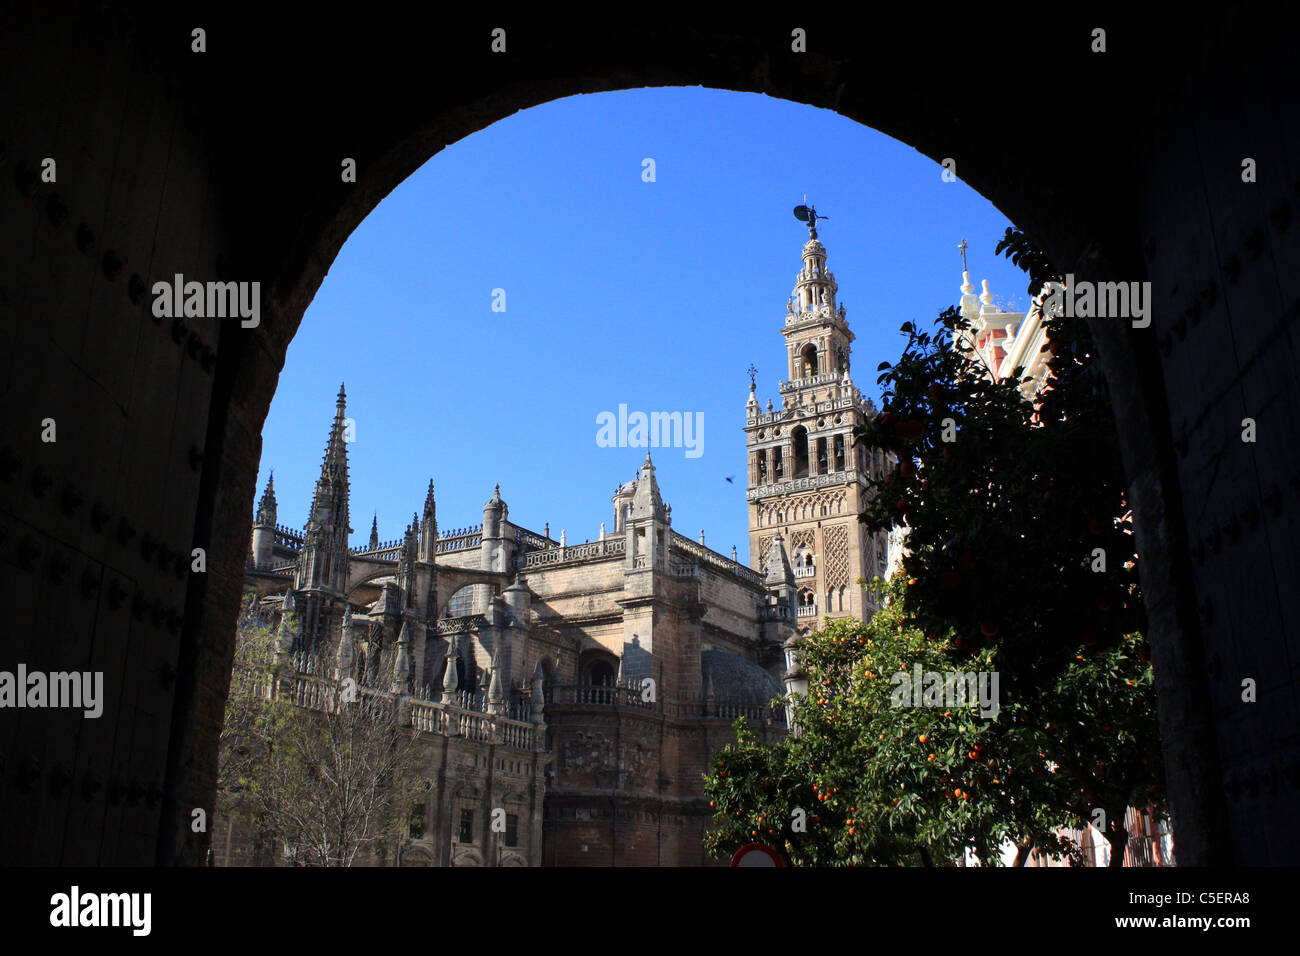 The Cathedral of Seville and its bell tower, known as the Giralda, in Seville, Andalusia, Spain, February 25, 2010. Stock Photo